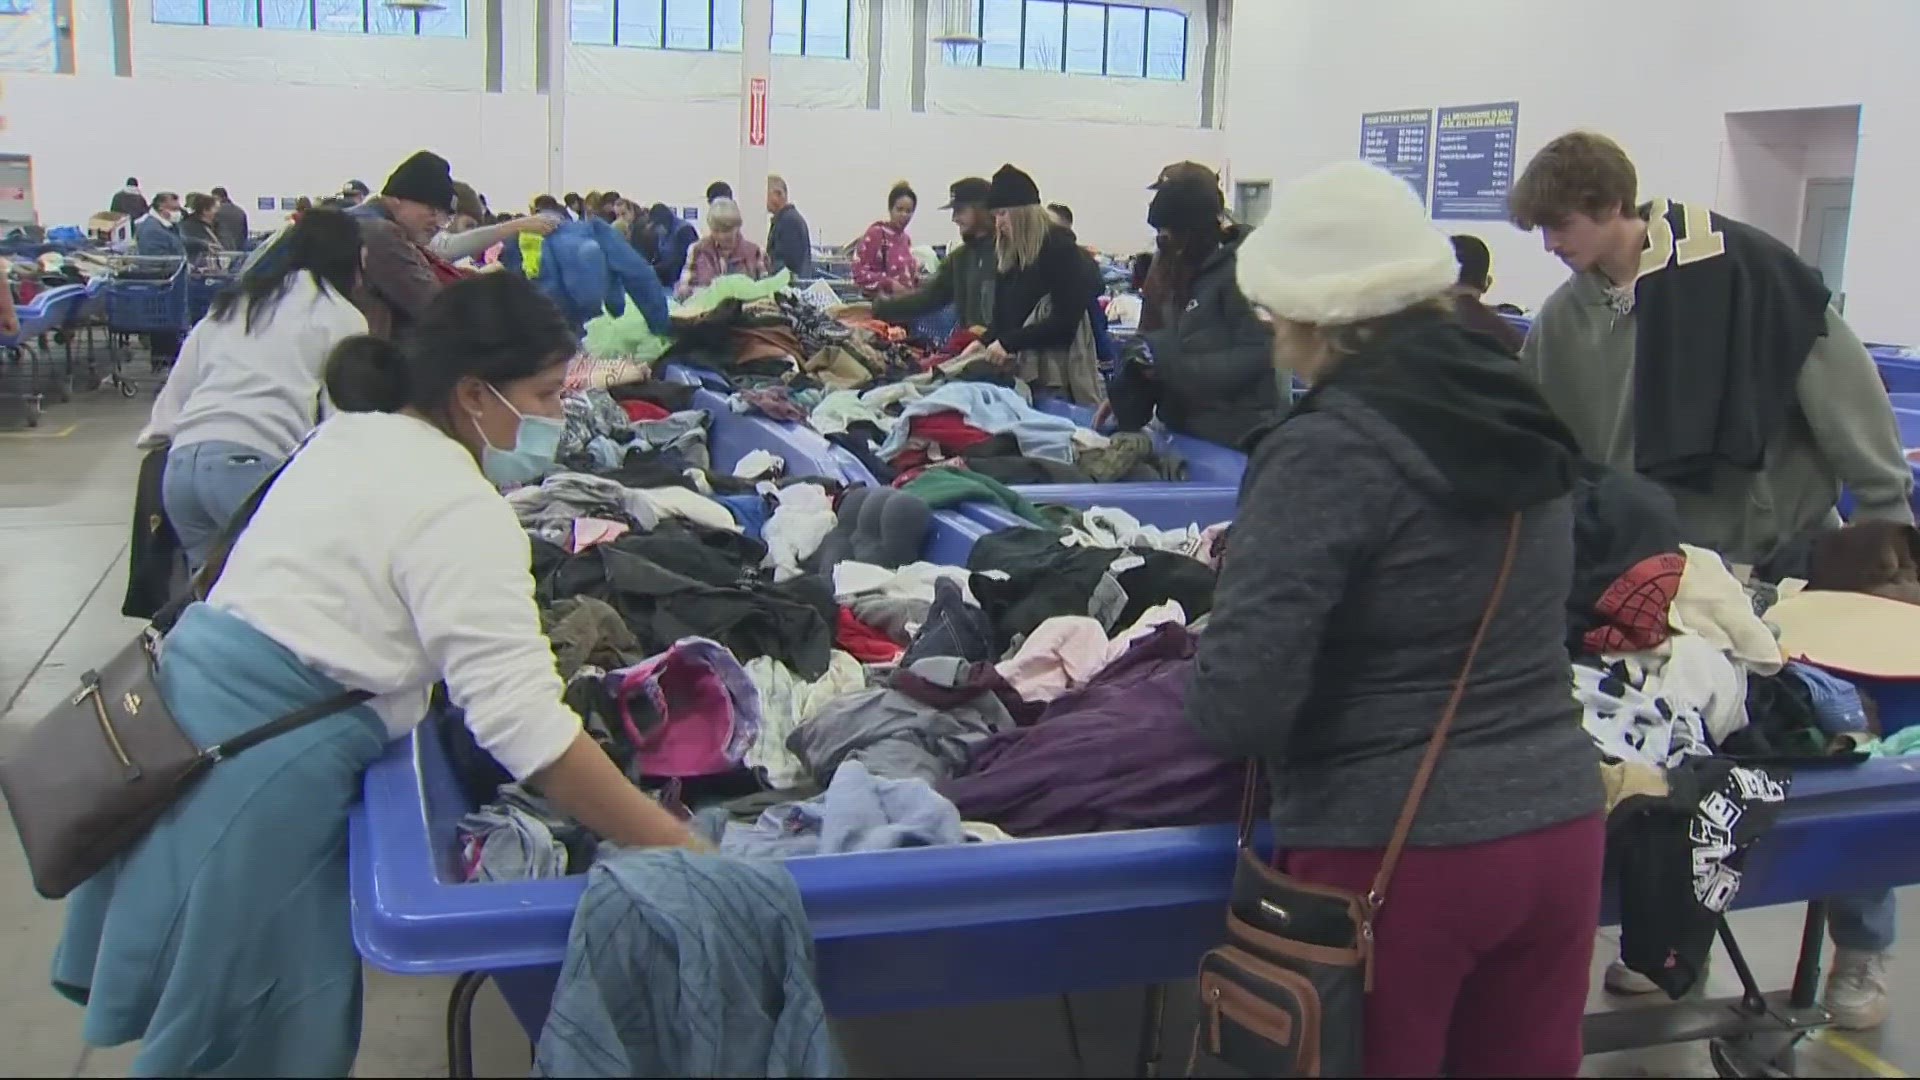 For many people, spring cleaning means donating clothing and revamping your wardrobe. Christine Pitawanich scored some deals at the Goodwill outlet store.